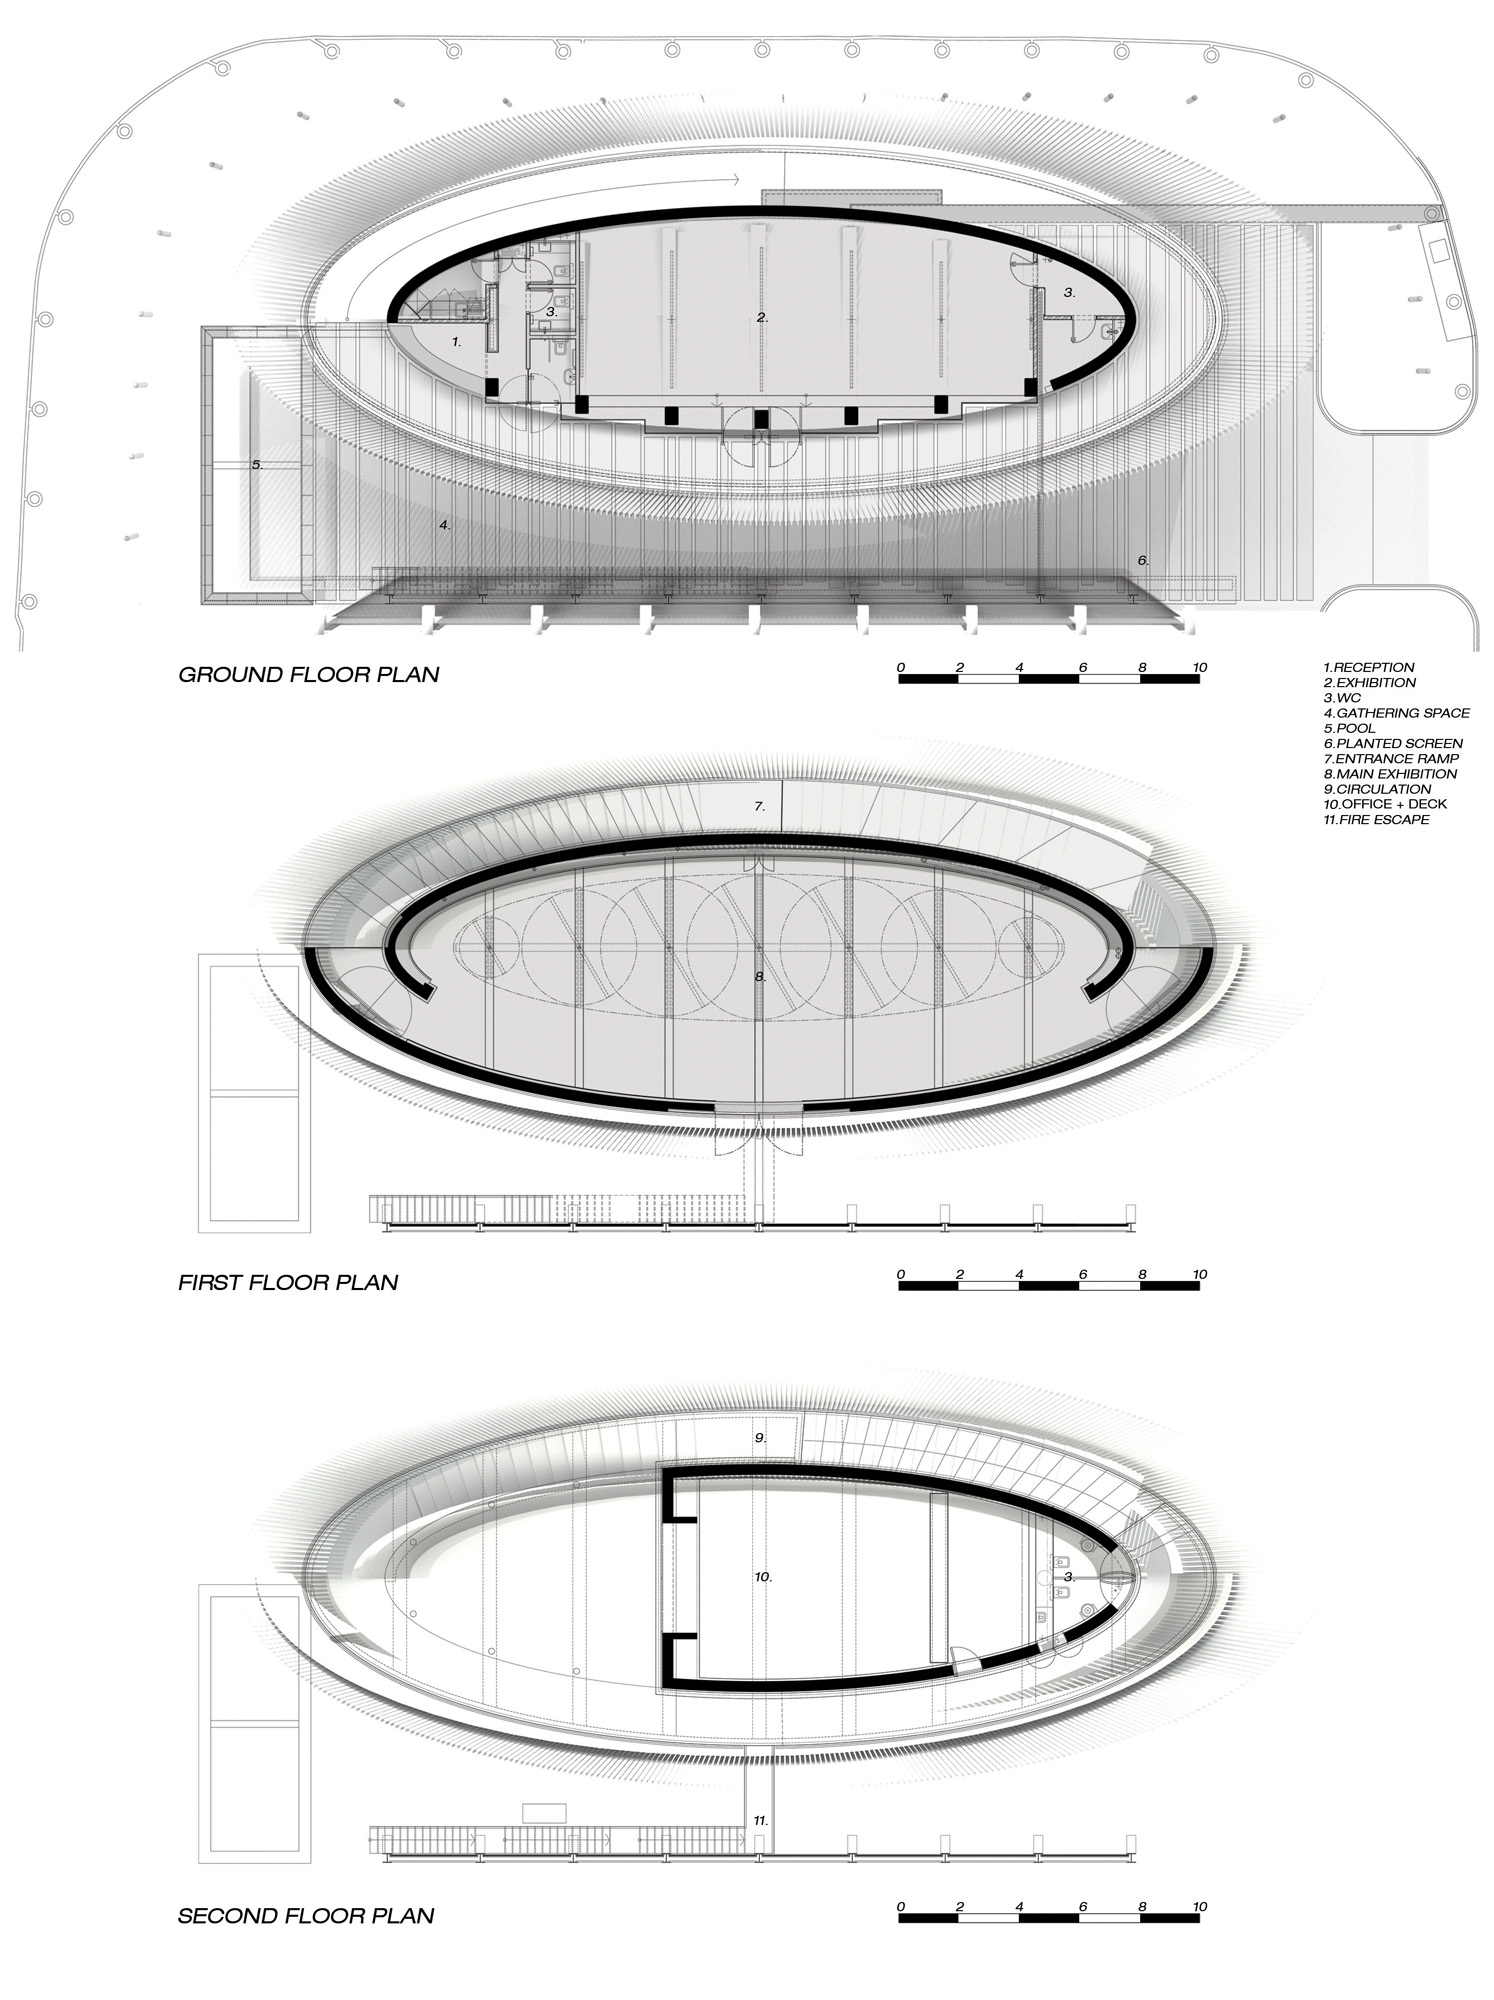 http://www.archdaily.com/wp-content/uploads/2009/11/1259351328-plans-with-renders.jpg